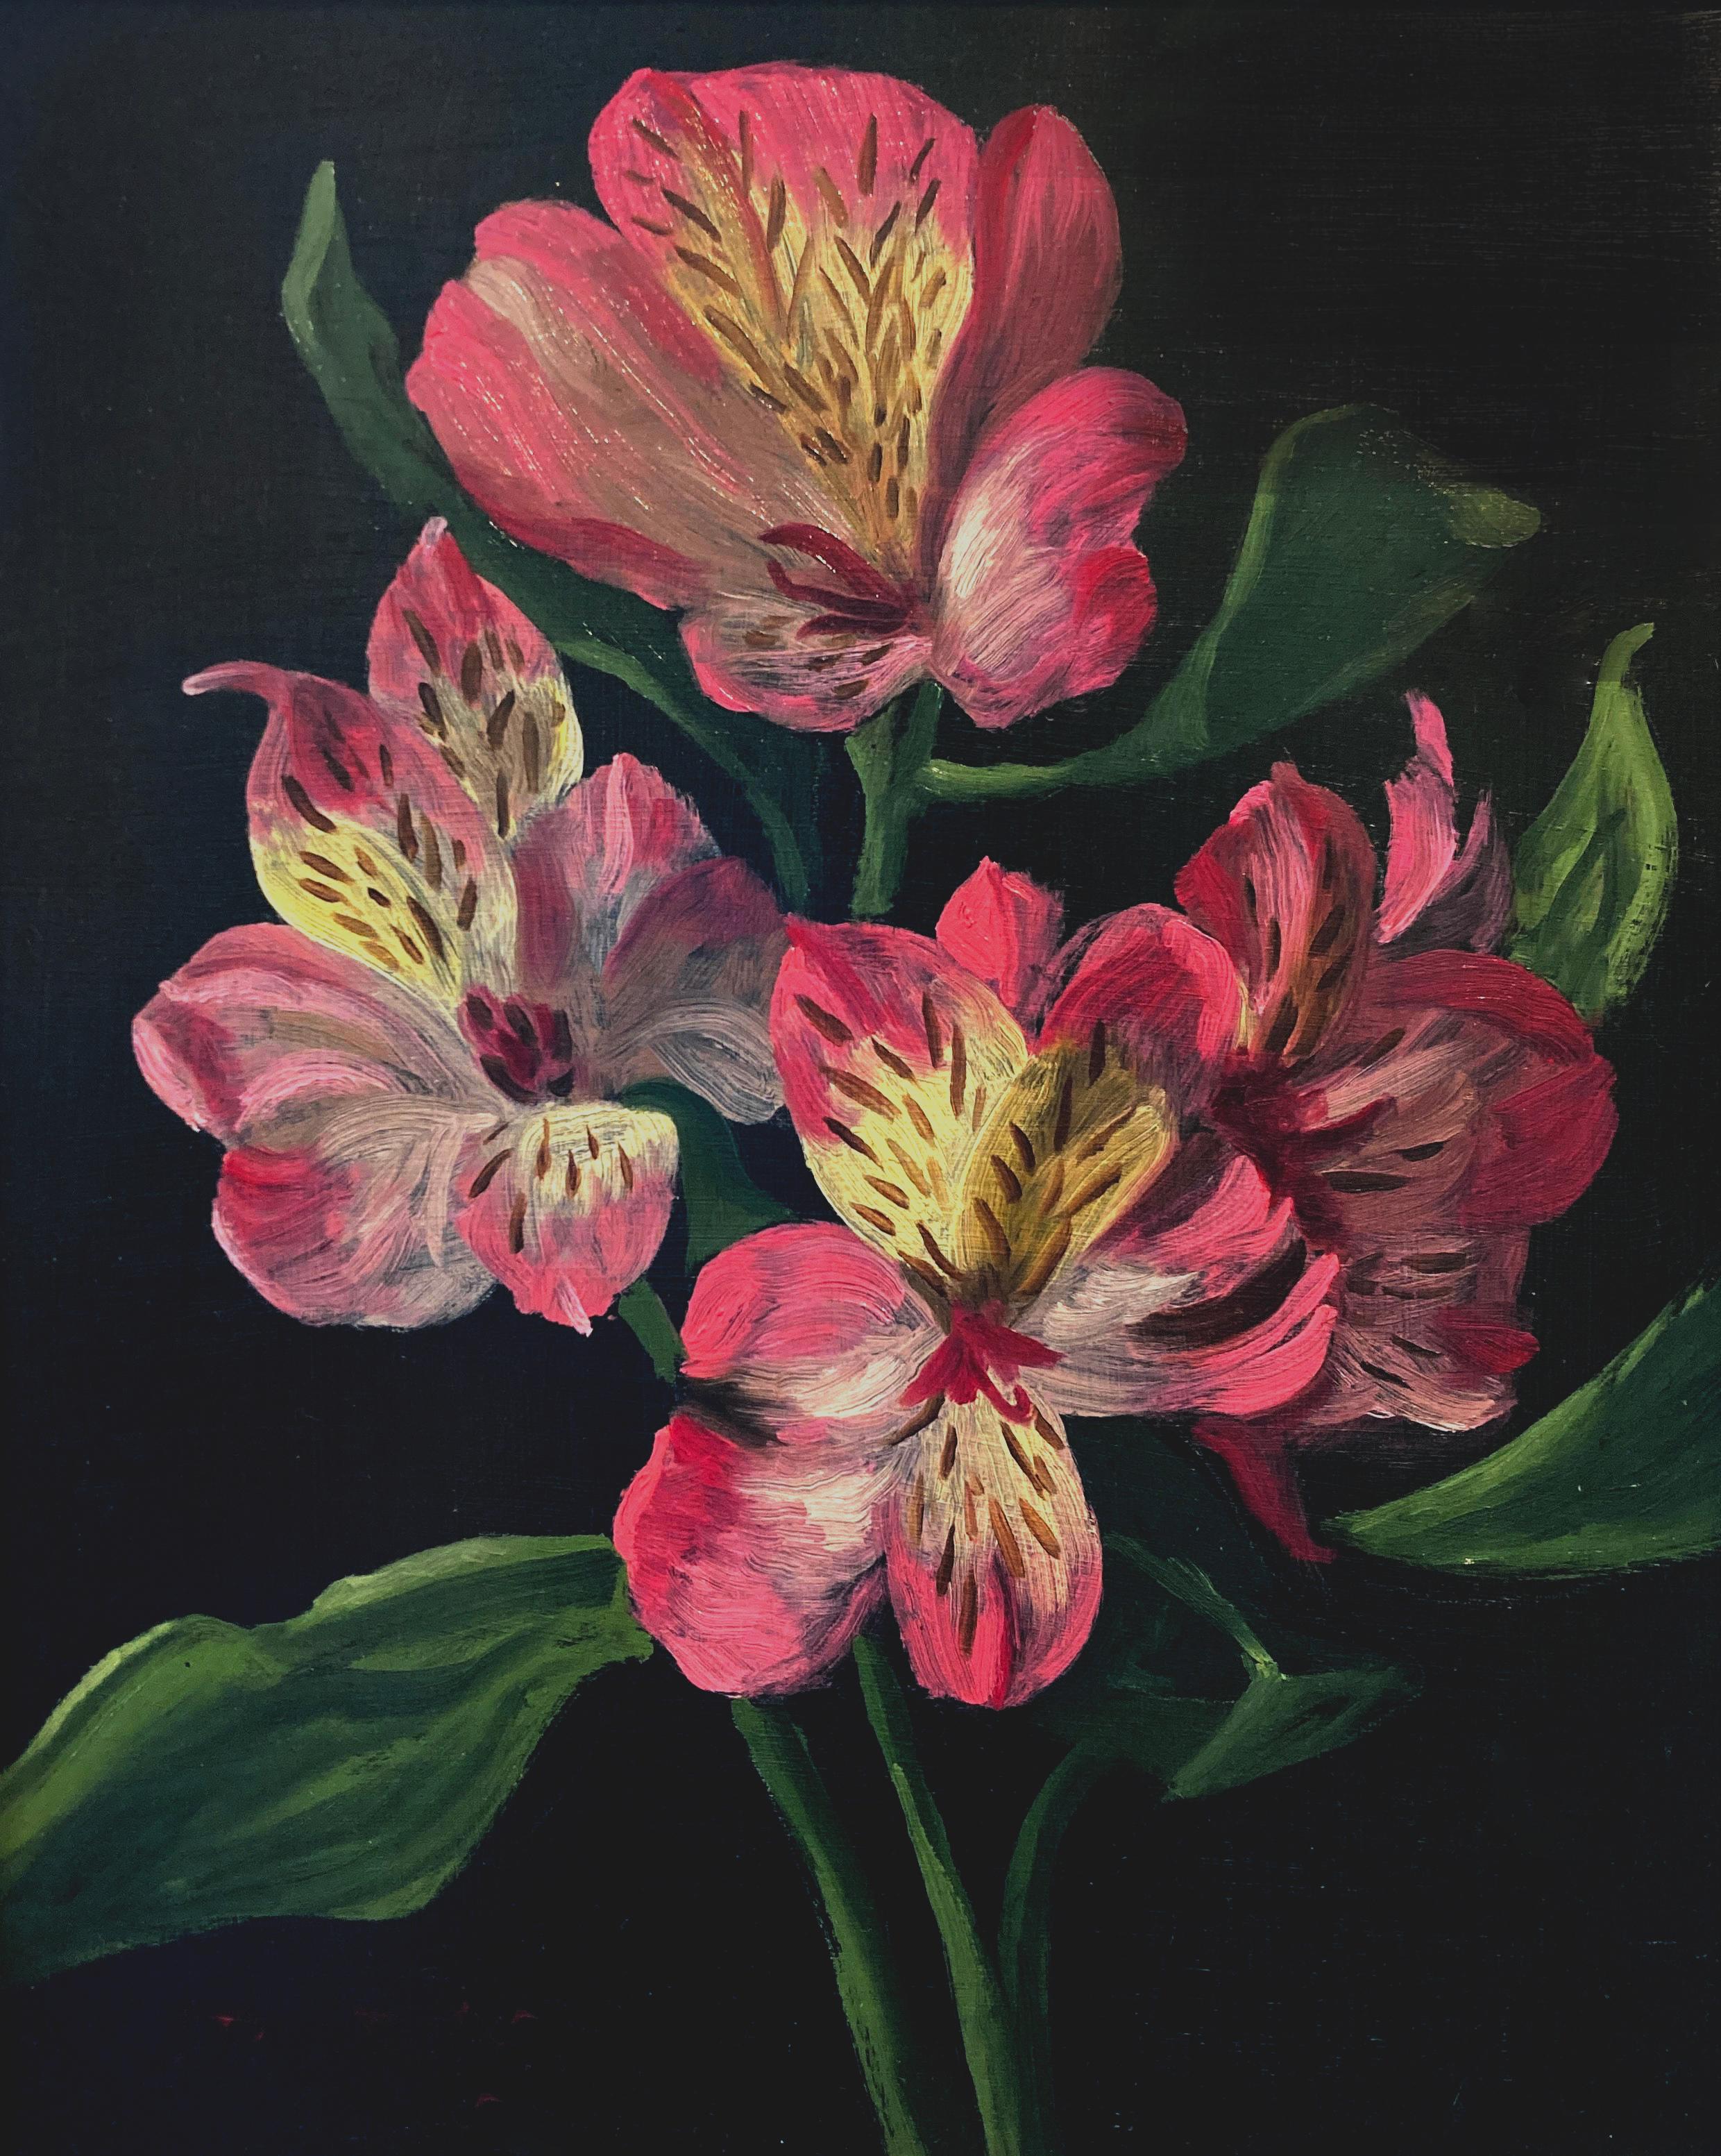 Christopher Pierce, "Pink and White Alstroemeria", 10x8 Floral Oil Painting 